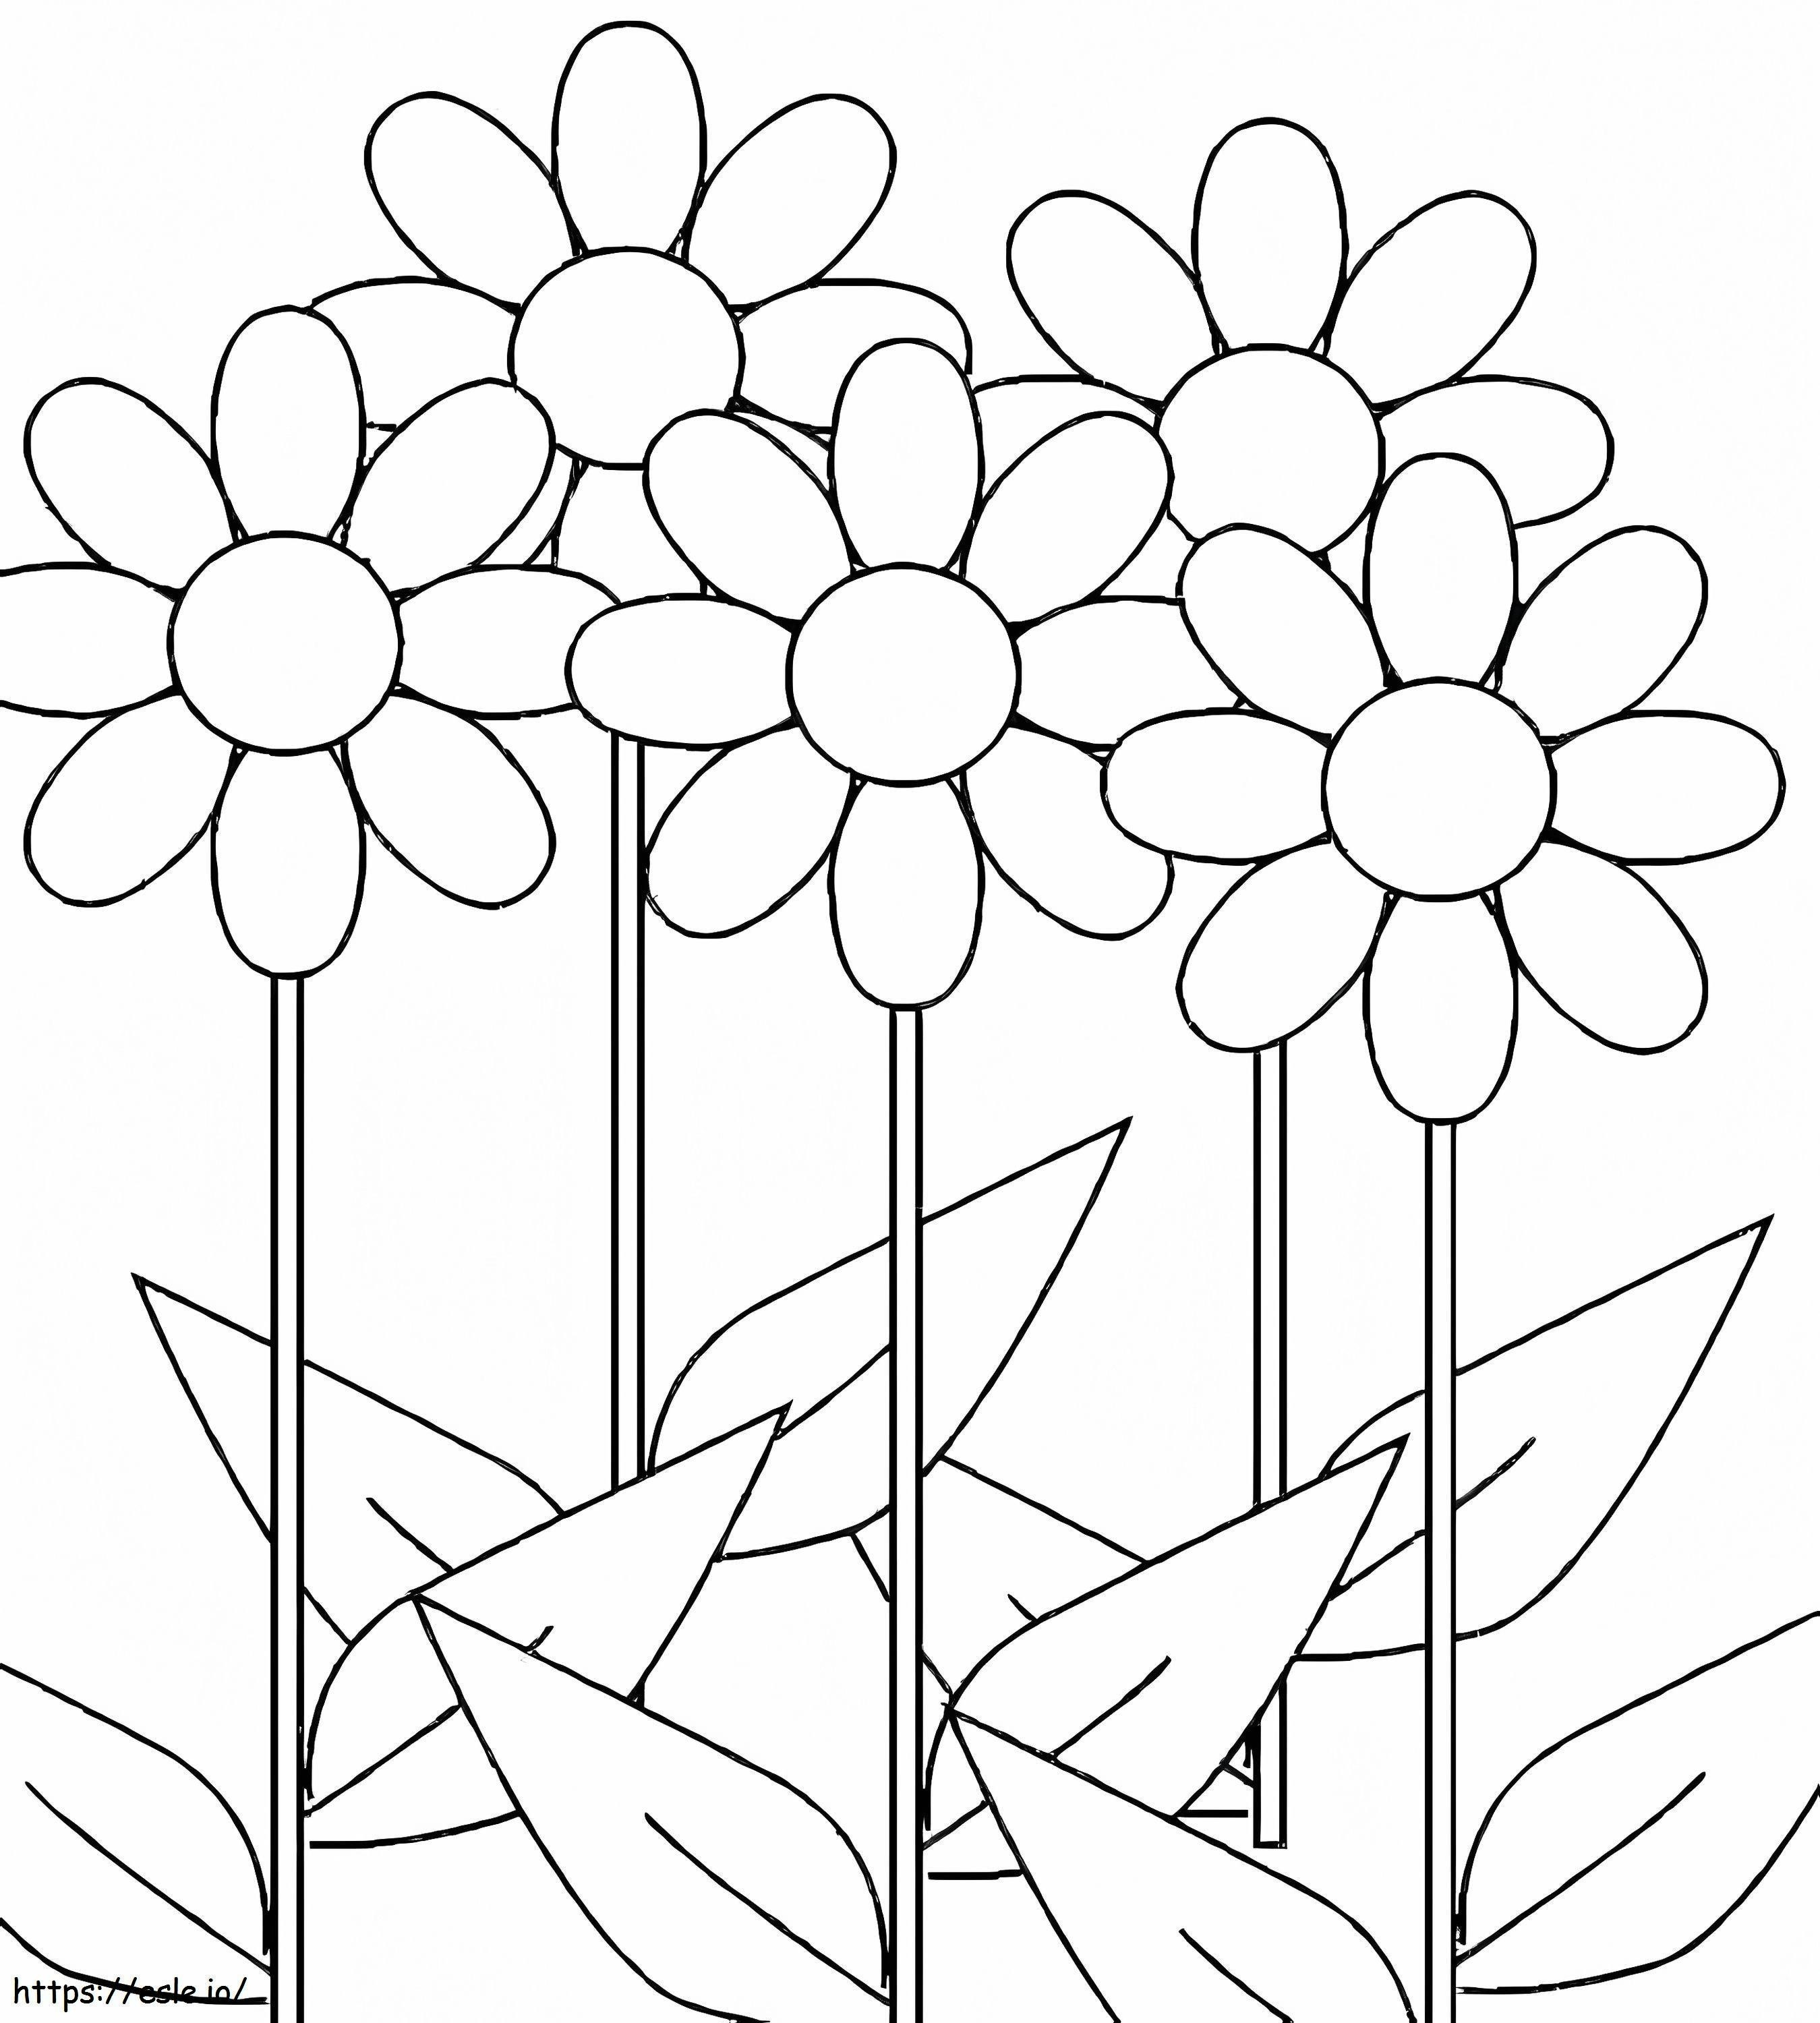 Five Daisy coloring page